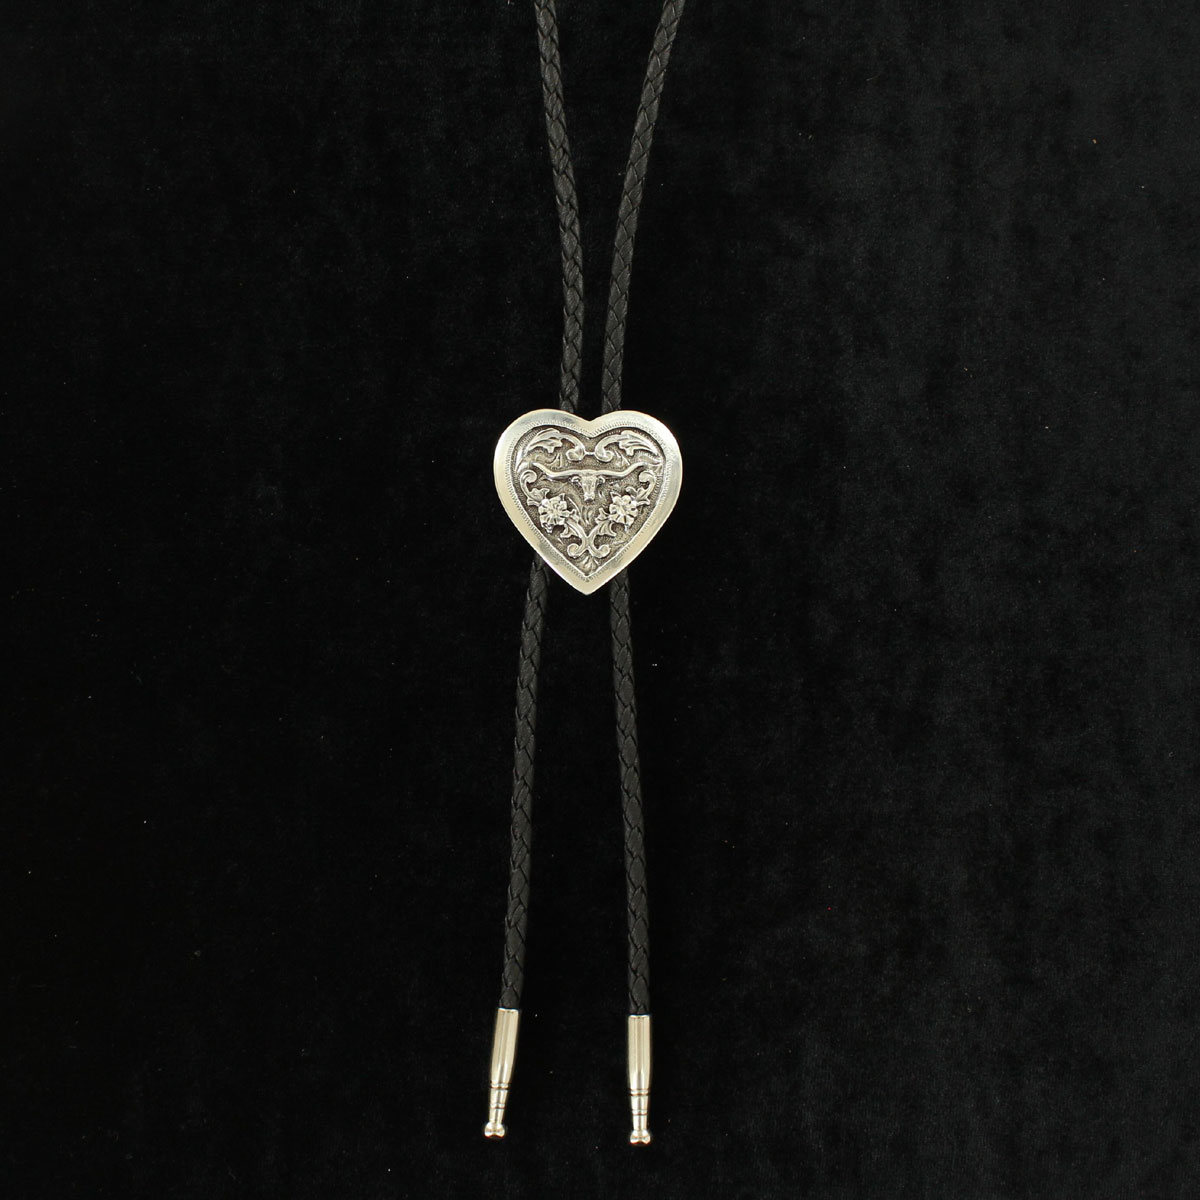 22105 Heart Shaped Slide With Longhorn Silver Bolo Tie